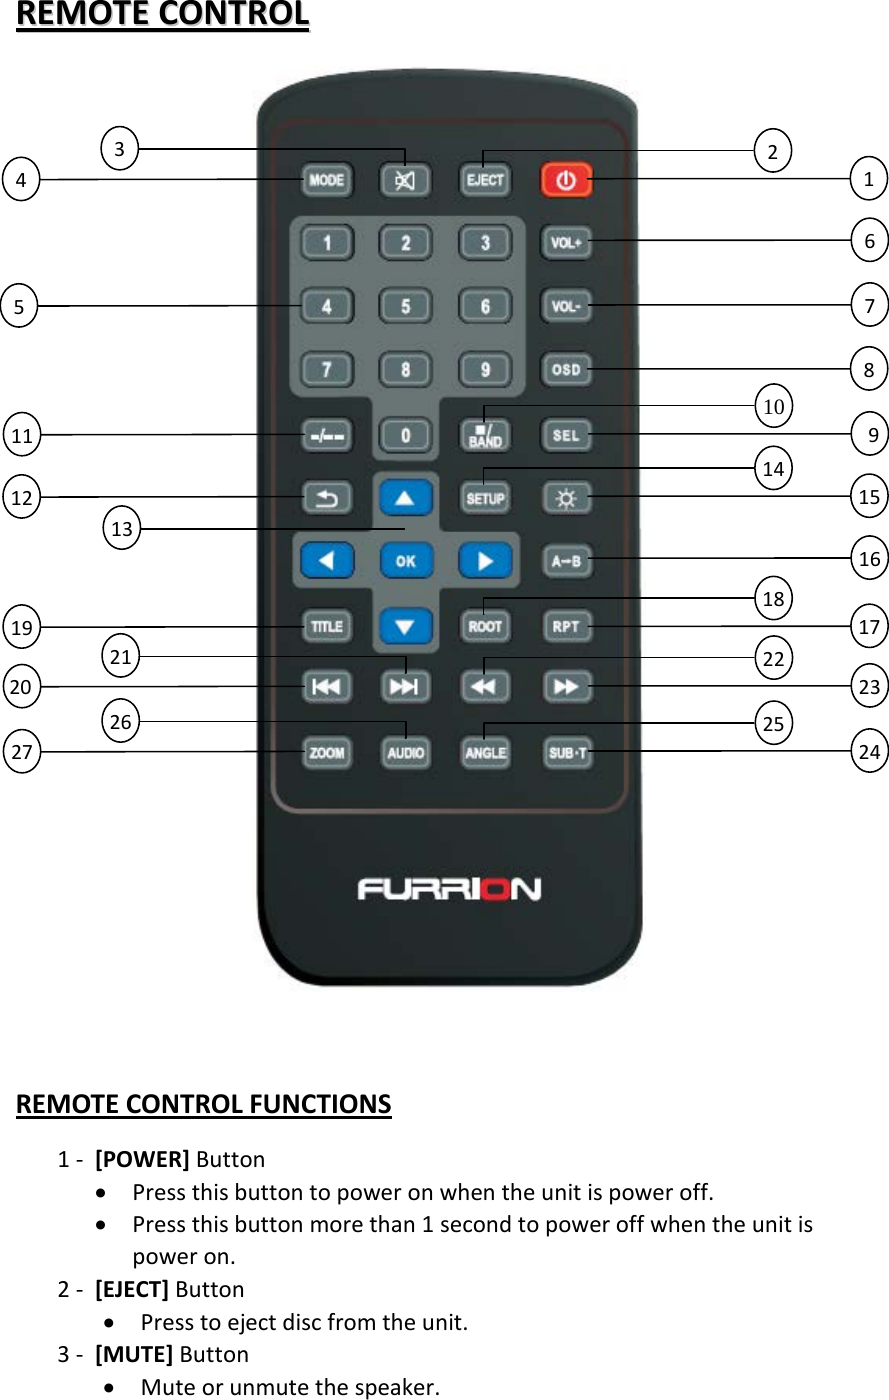 RREEMMOOTTEE  CCOONNTTRROOLL     REMOTE CONTROL FUNCTIONS 1 - [POWER] Button • Press this button to power on when the unit is power off. • Press this button more than 1 second to power off when the unit is power on. 2 - [EJECT] Button • Press to eject disc from the unit. 3 - [MUTE] Button • Mute or unmute the speaker. 2 1 3 4 6 7 8 11 10  9 14 15 12 16 13 18 17 19 22 23 21 20 25 24 26 27 5 